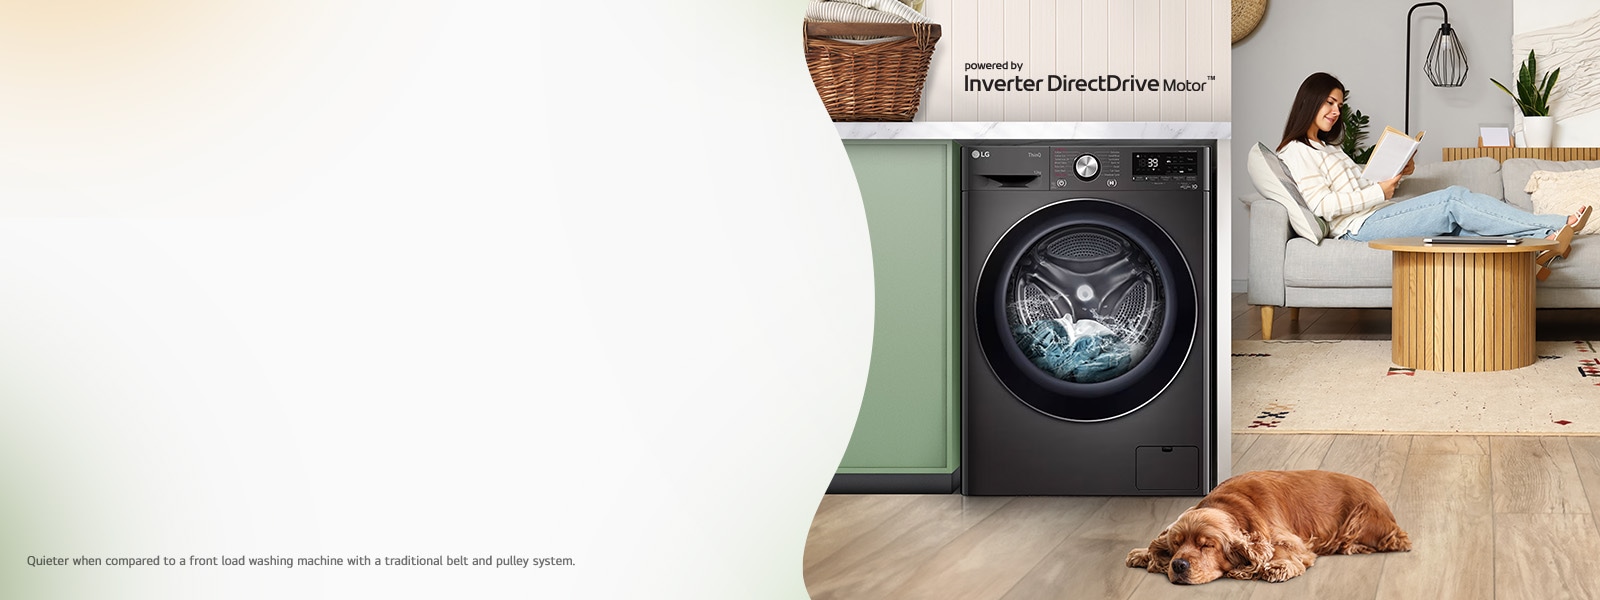 Save up to $500 on select Washing Machines1